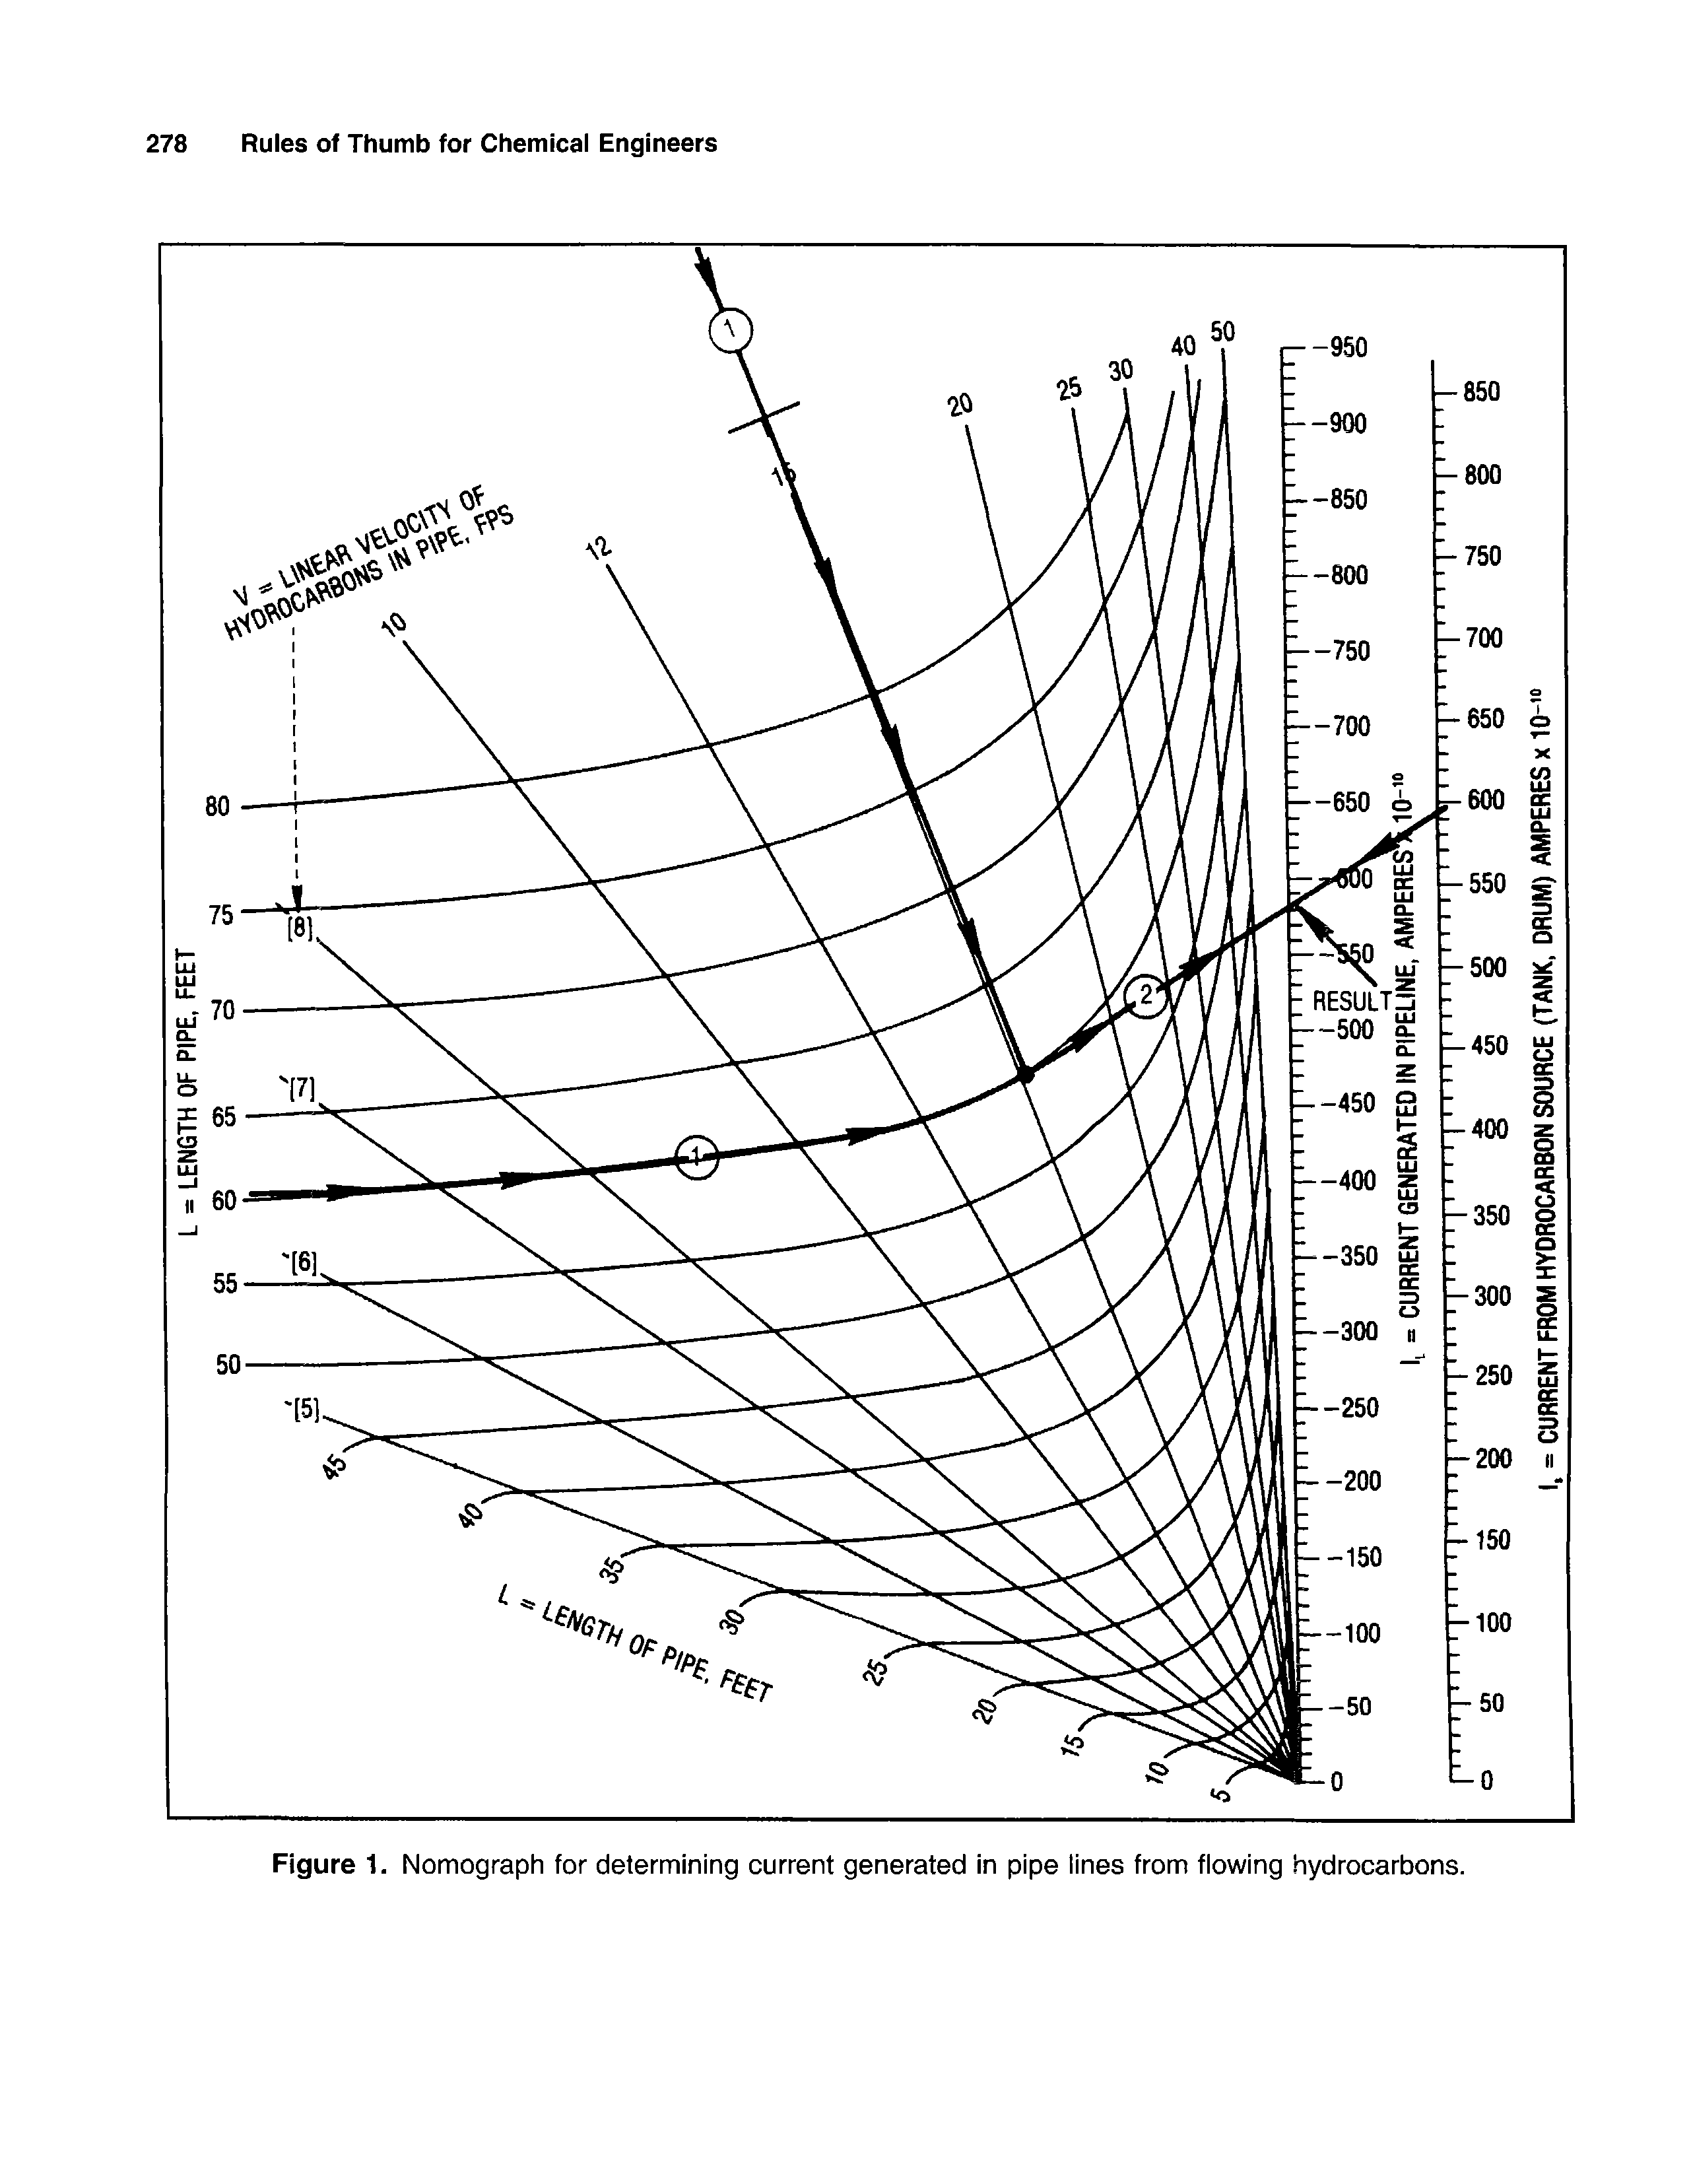 Figure 1. Nomograph for determining current generated in pipe lines from fiowing hydrocarbons.